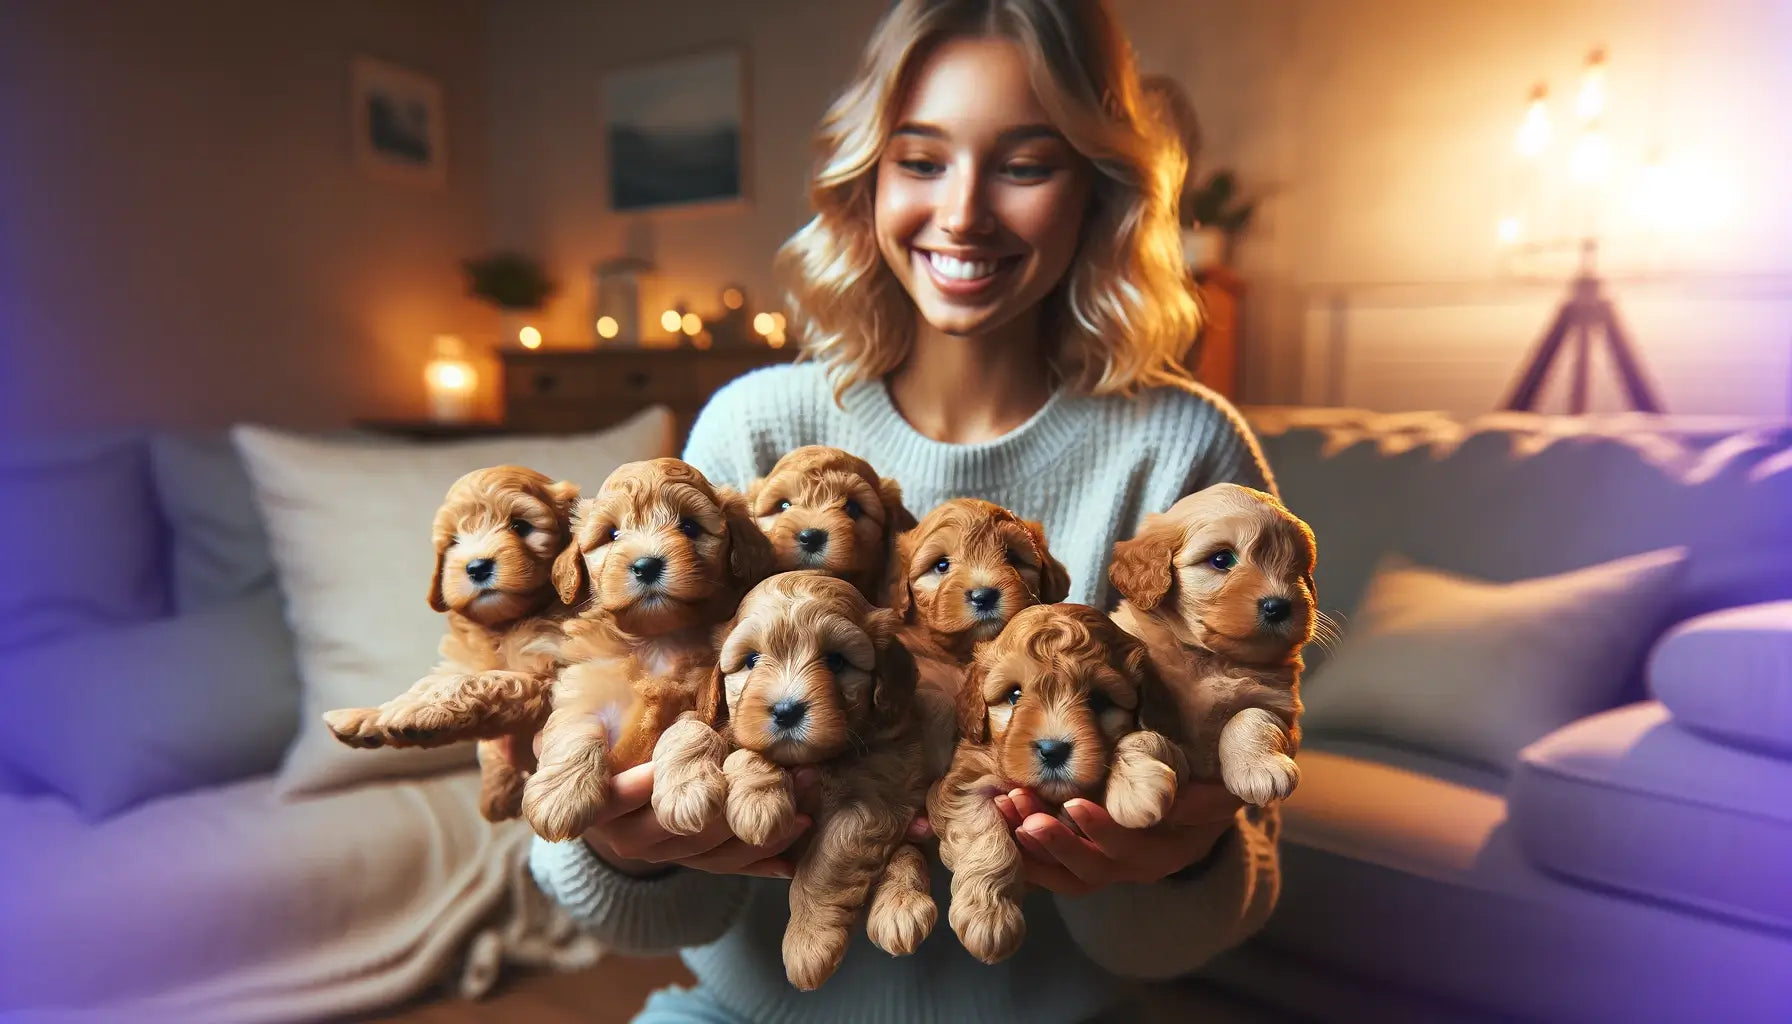 Warm and inviting image showcasing a breeder's Teacup Goldendoodle puppies.